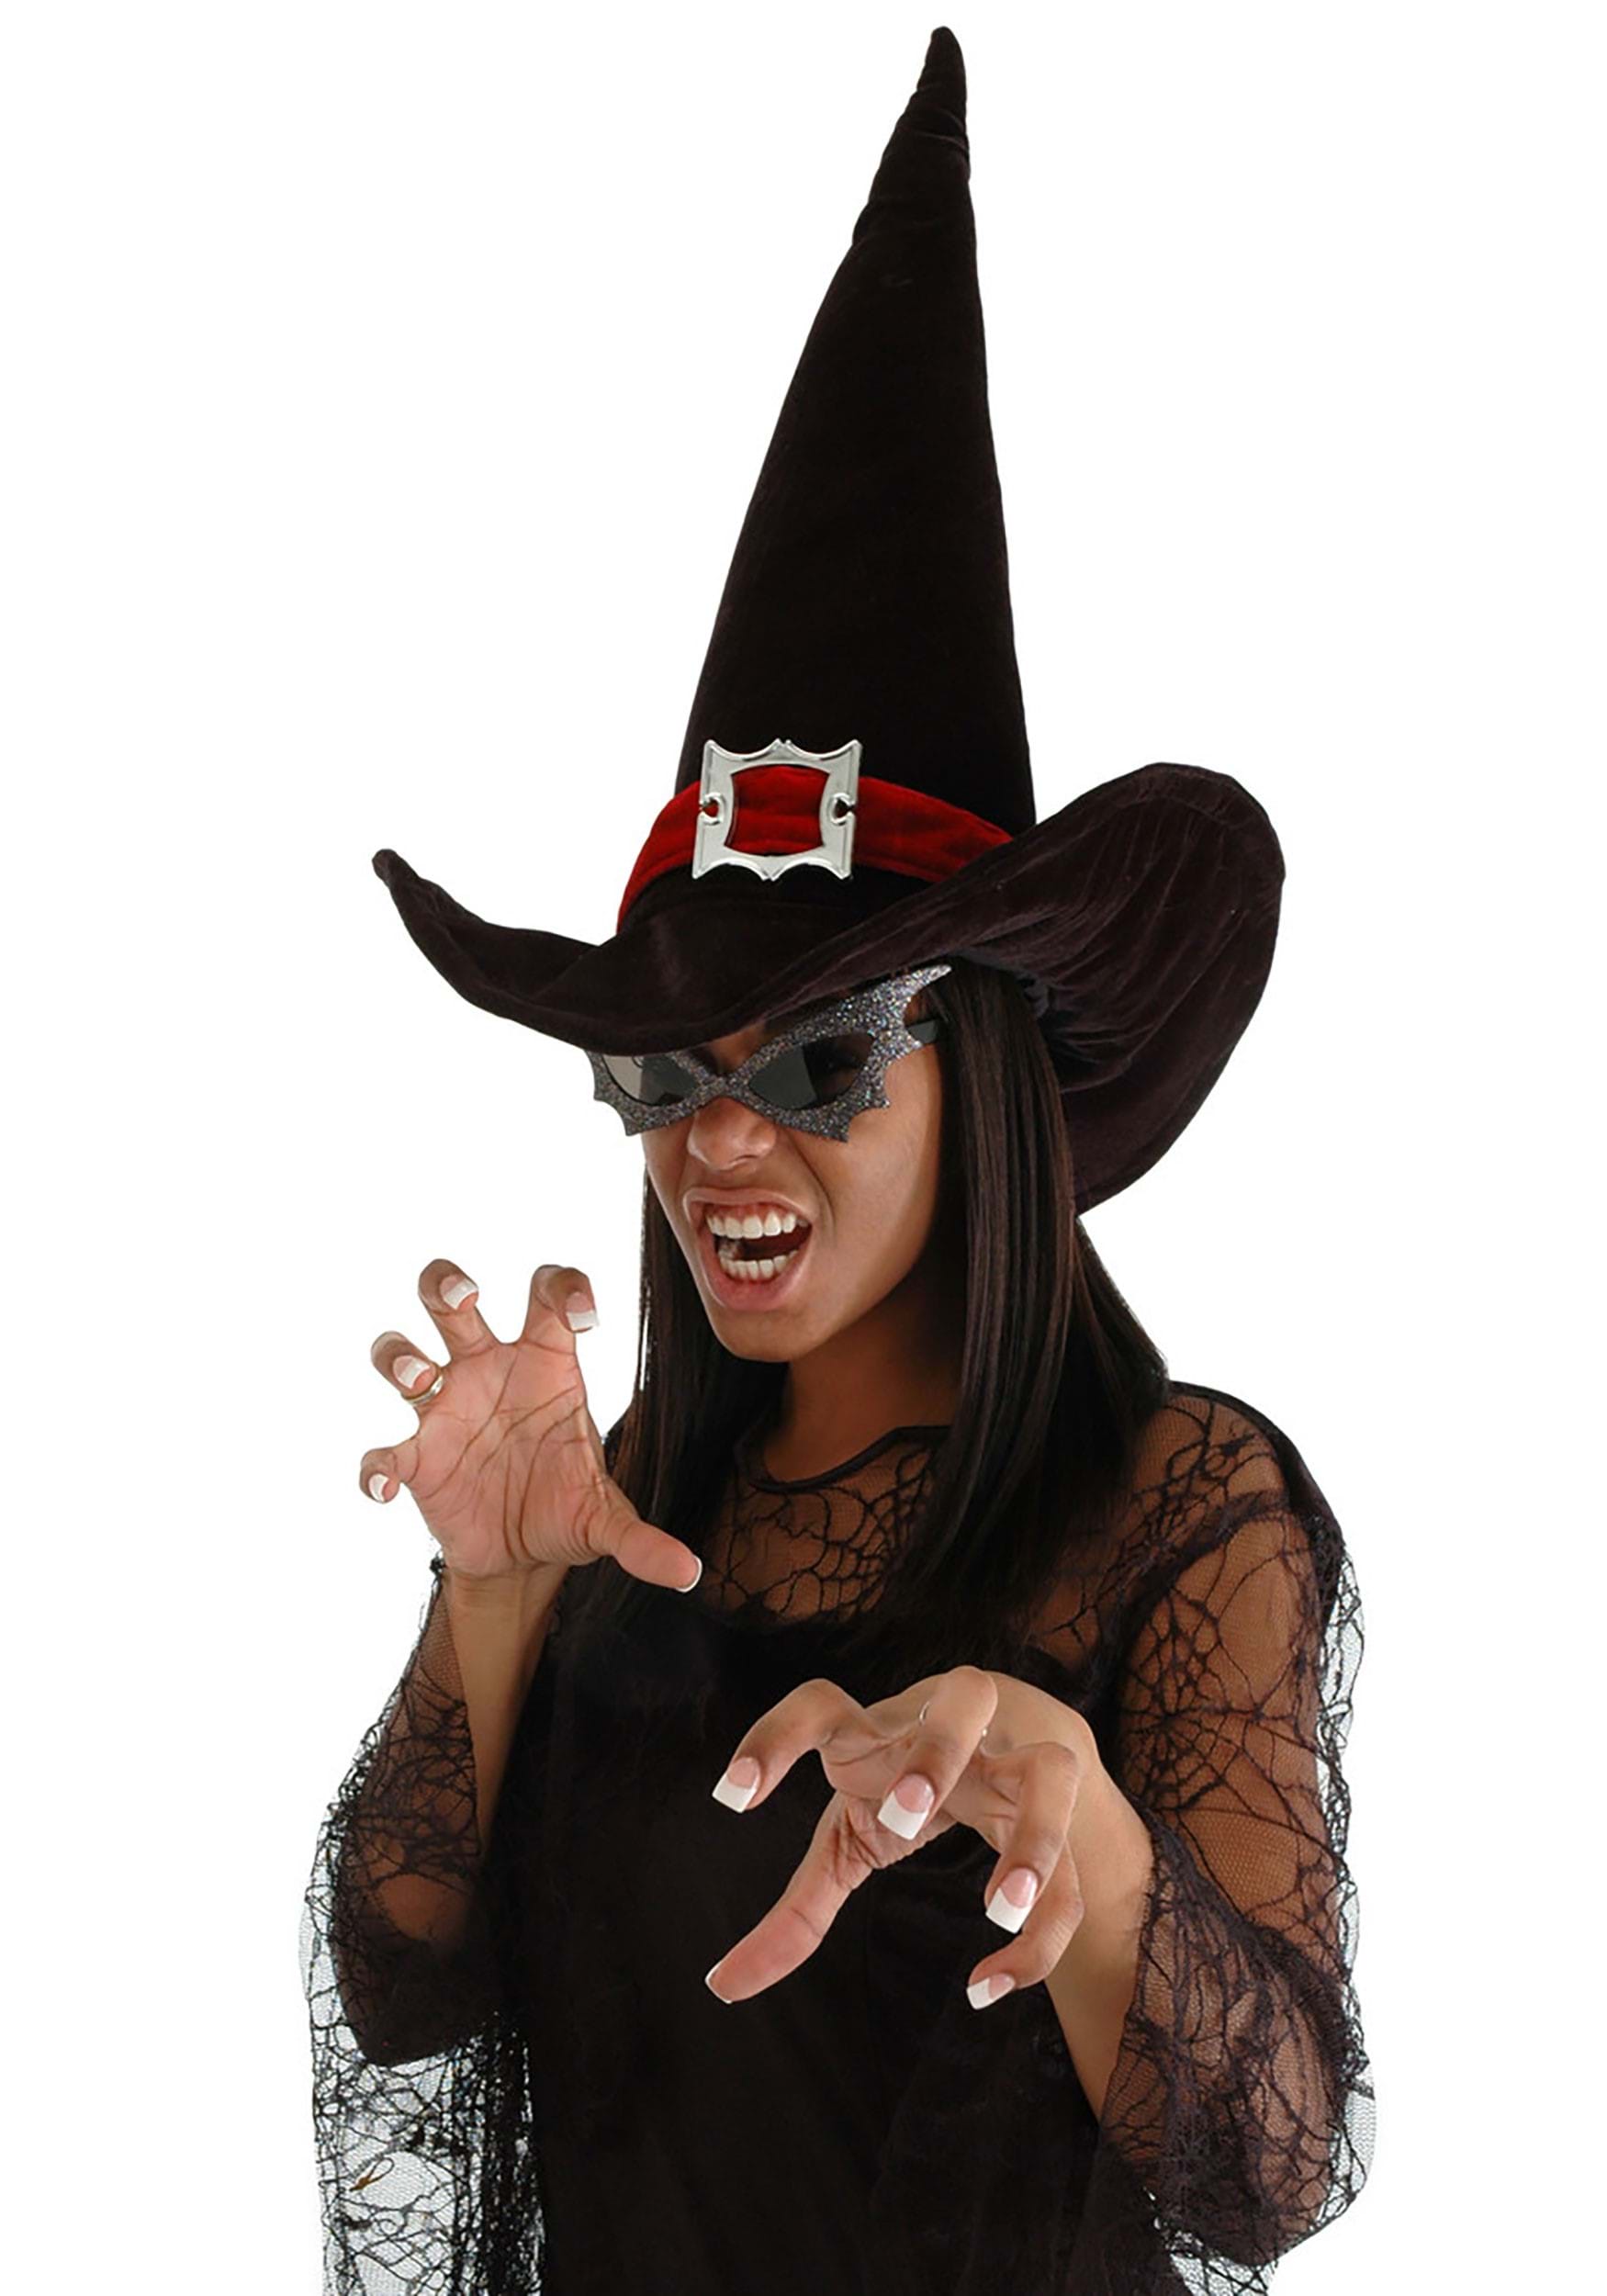 Photos - Fancy Dress FUN Costumes Tall Witch Plush Hat Black/Red